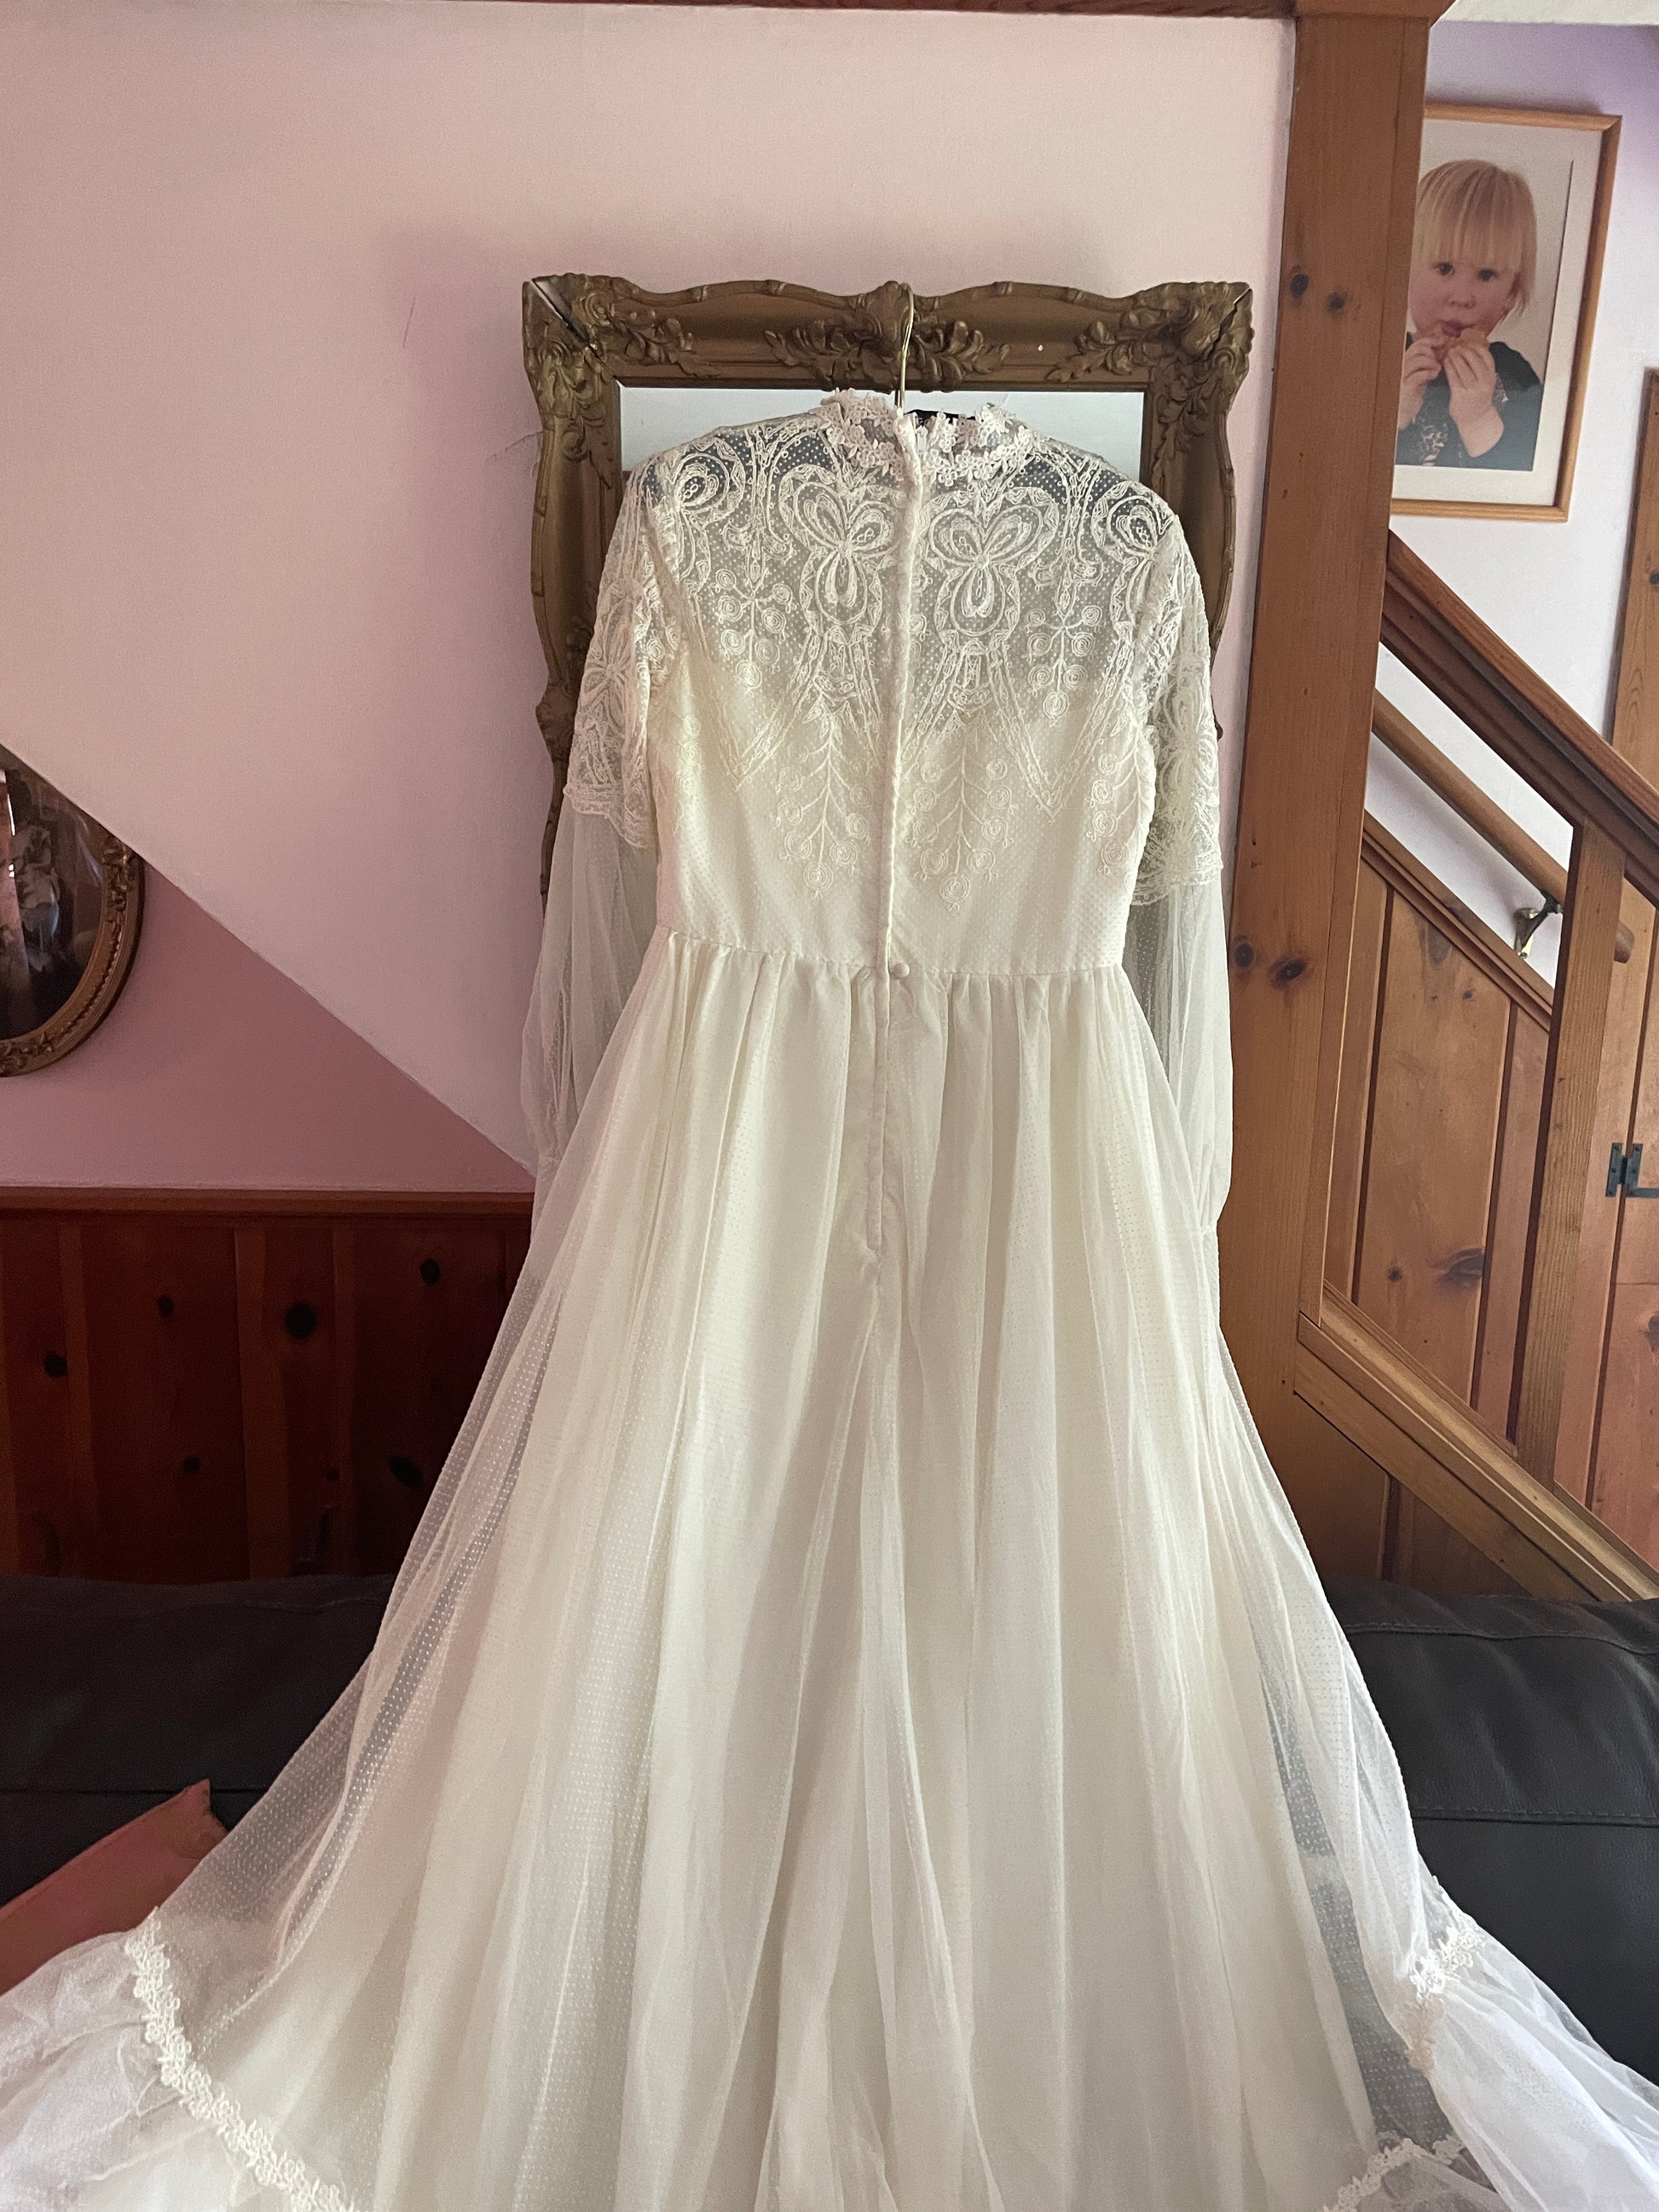  70s Gorgeous White Floral Lace Handmade Wedding Dress